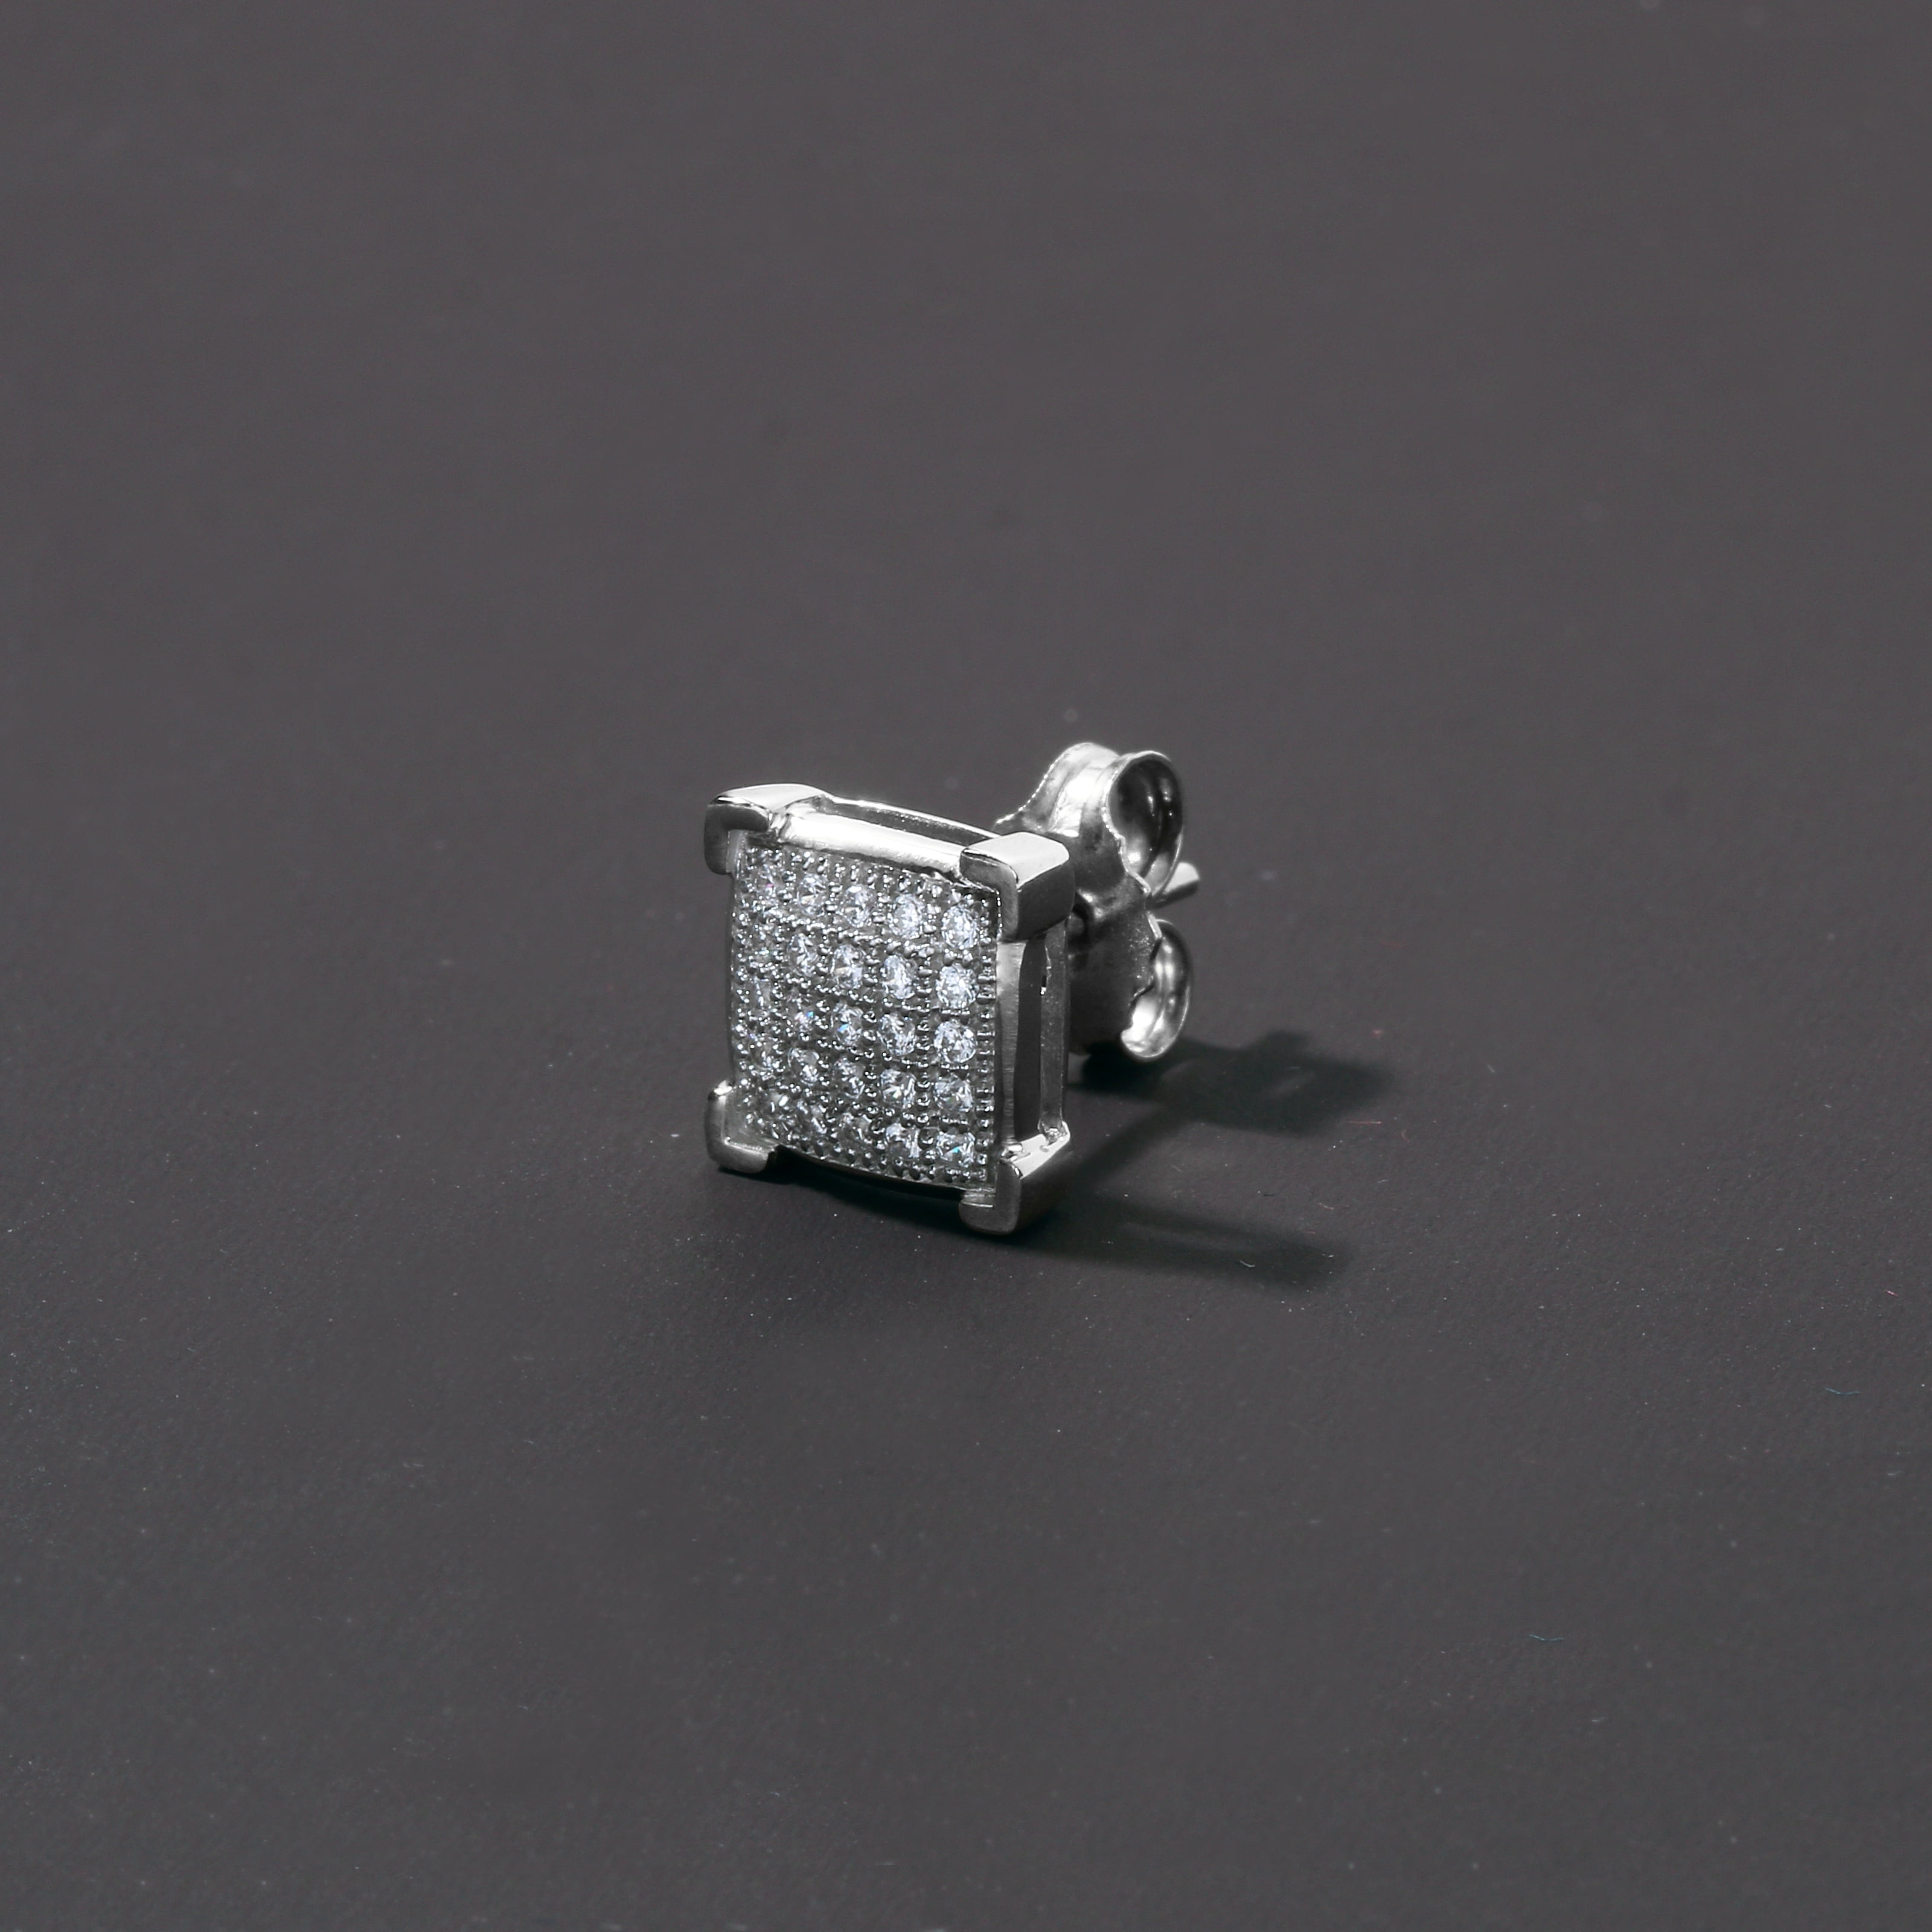 Real Solid 925 Silver Iced Simulated Diamond Earrings Screw Back Square  Men's